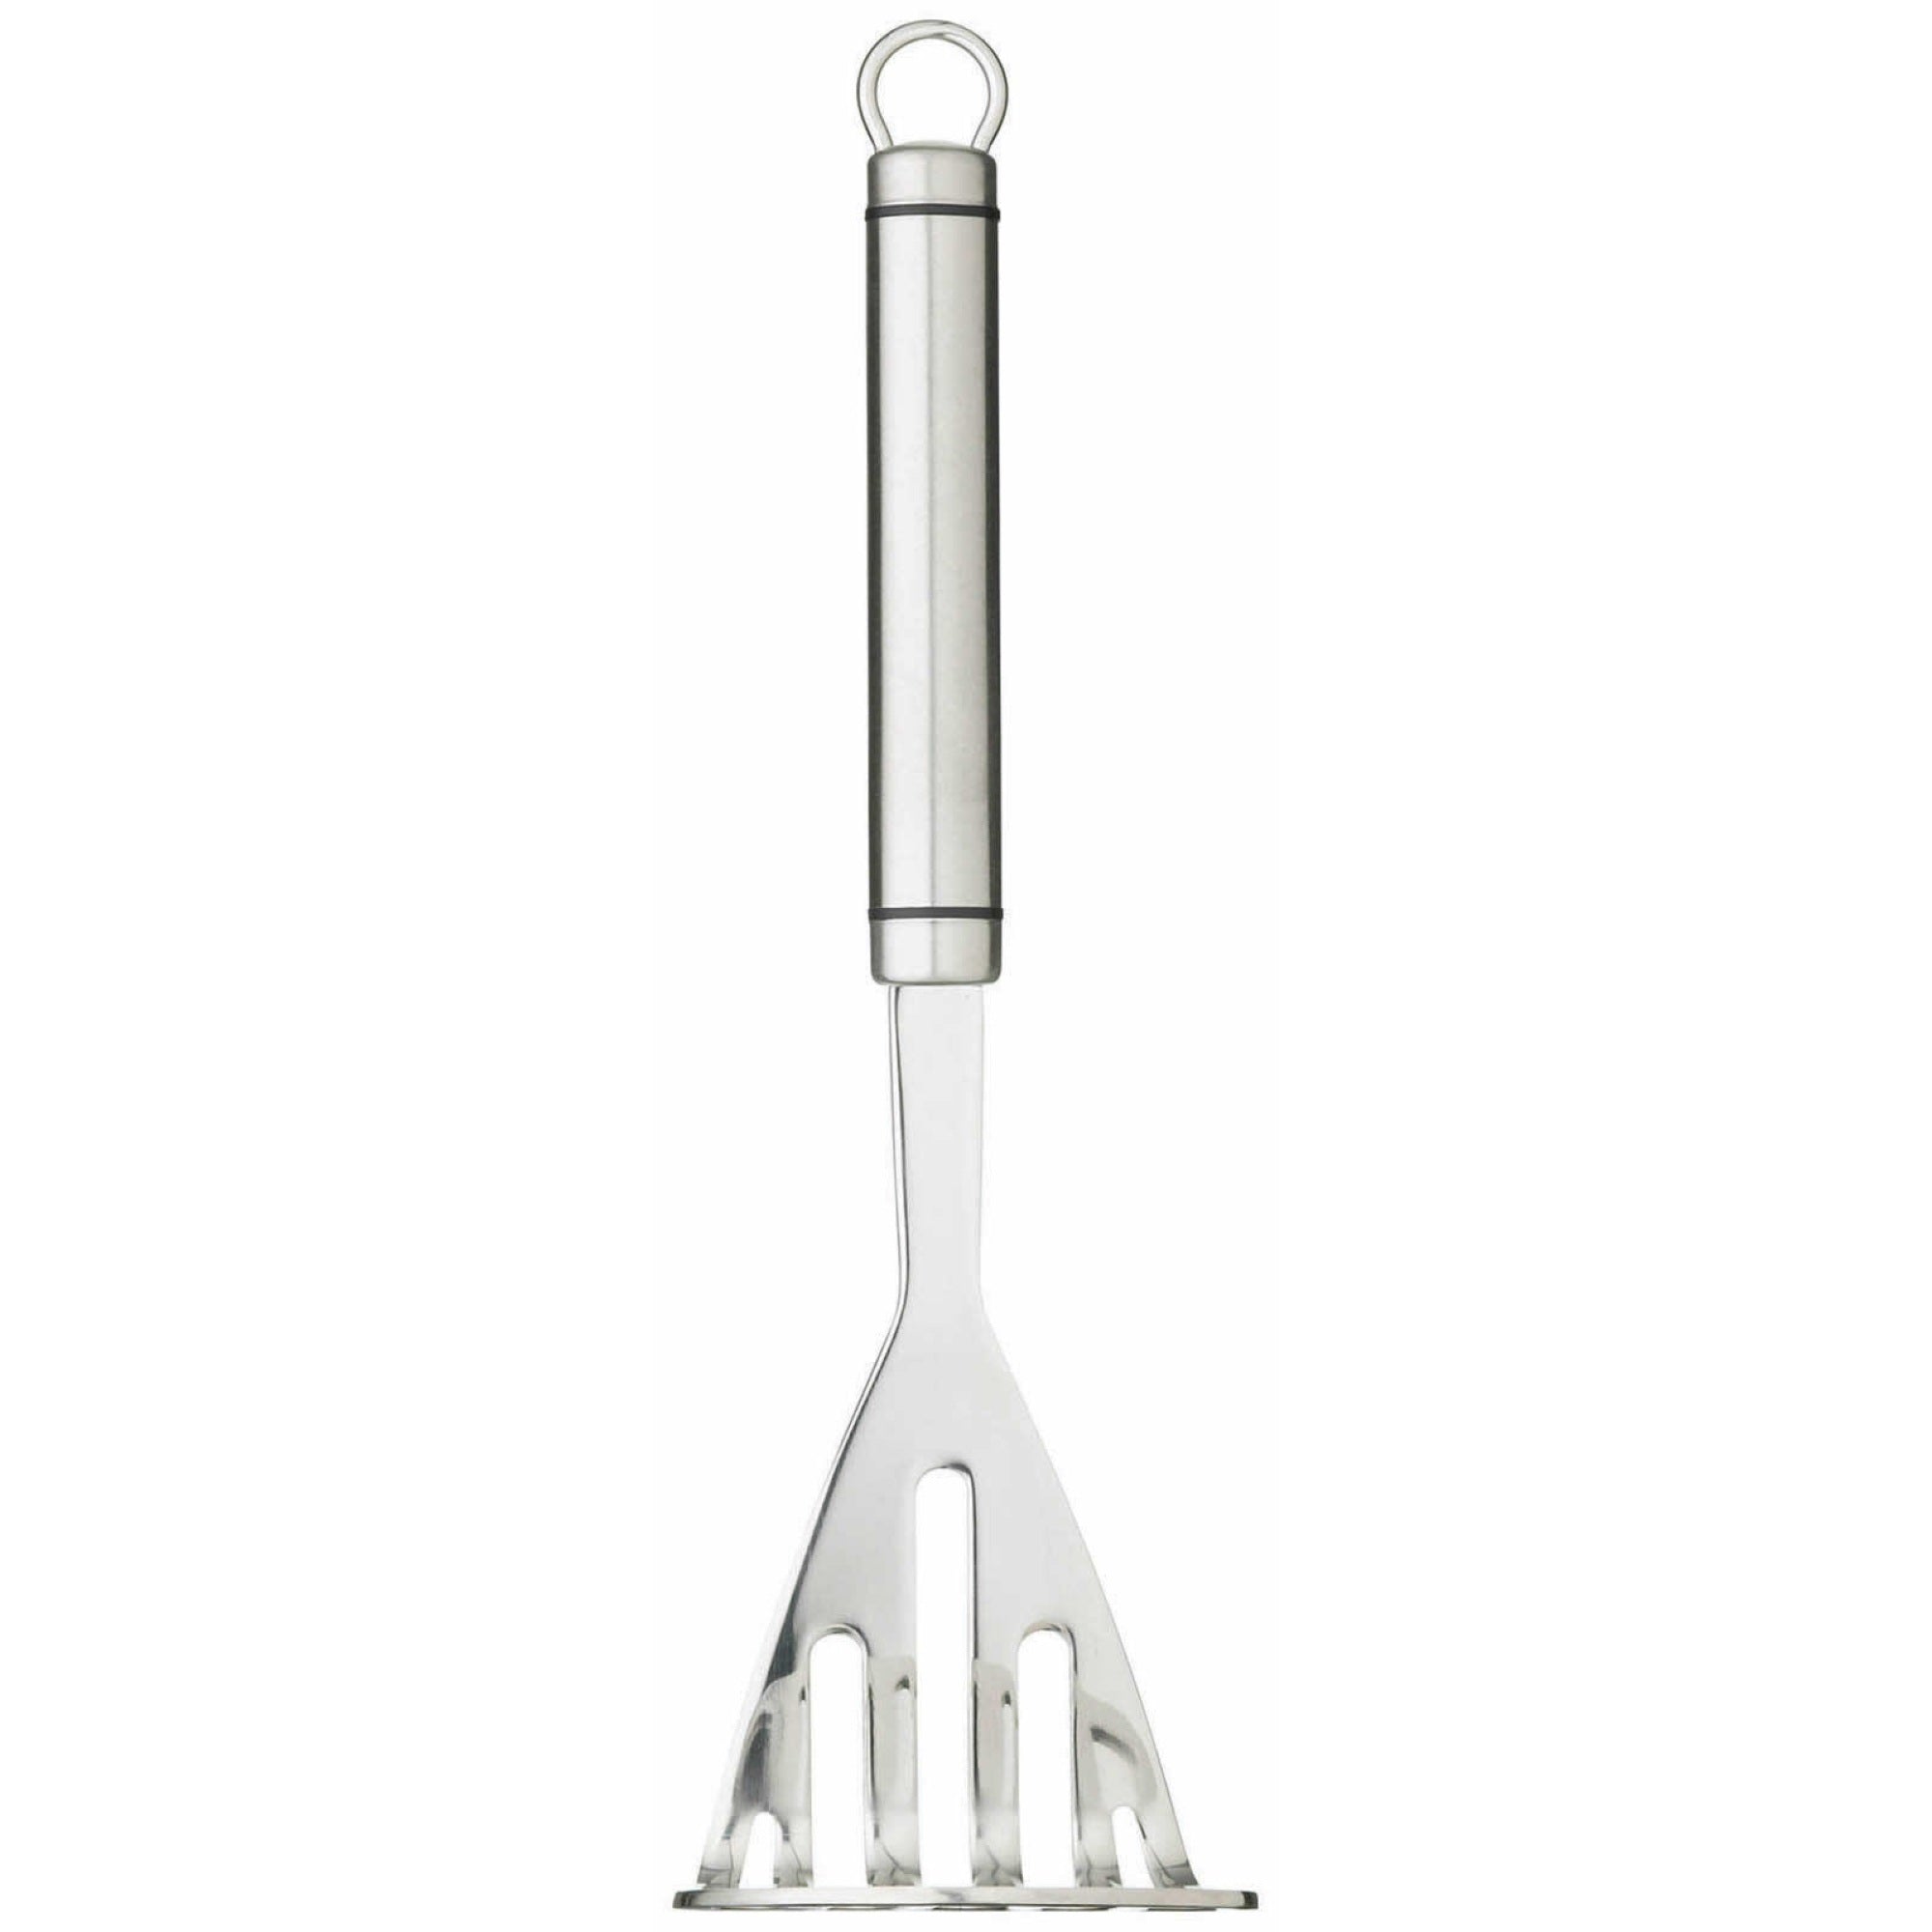 KitchenCraft Oval Handled Professional Stainless Steel Potato Masher - The Cooks Cupboard Ltd